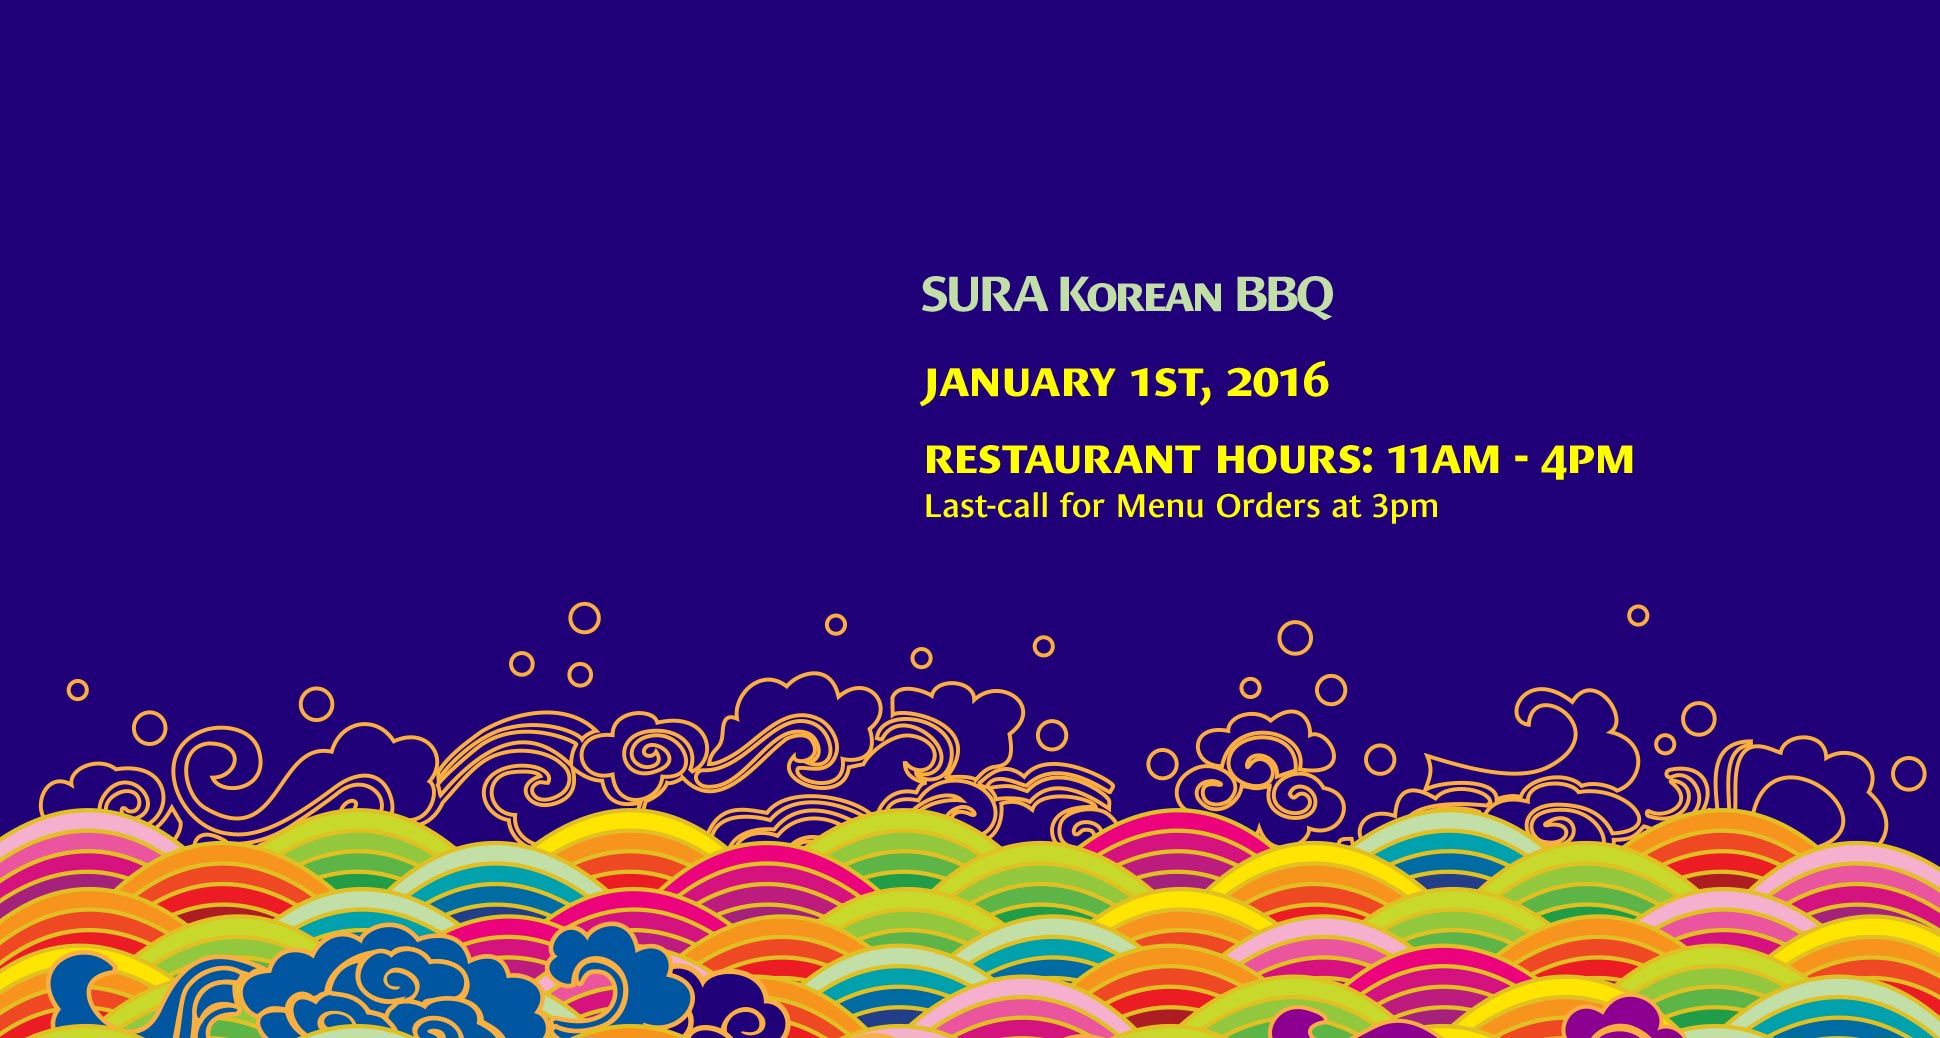 Happy new year! Restaurant hours on January 1st, 2016